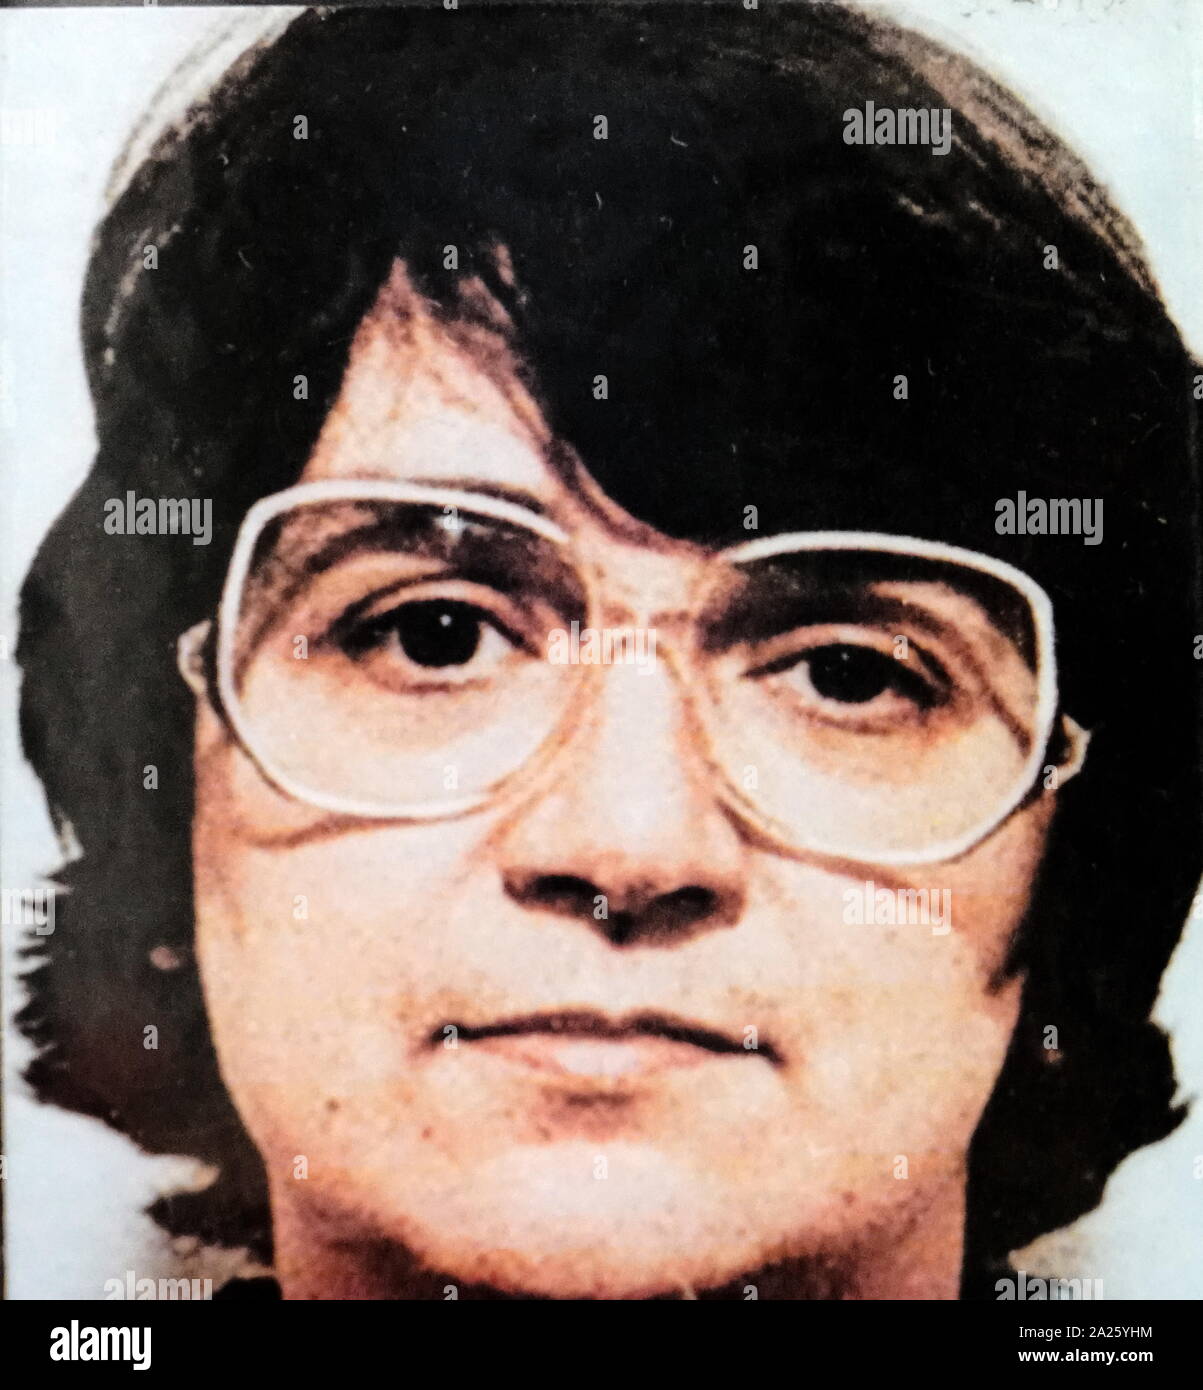 Photograph of Rosemary West. Rosemary Pauline 'Rose' West (1953-) a British serial killer who, along with her husband Fred West (1941-1995), committed at least 12 murders between 1967 and 1987. Stock Photo